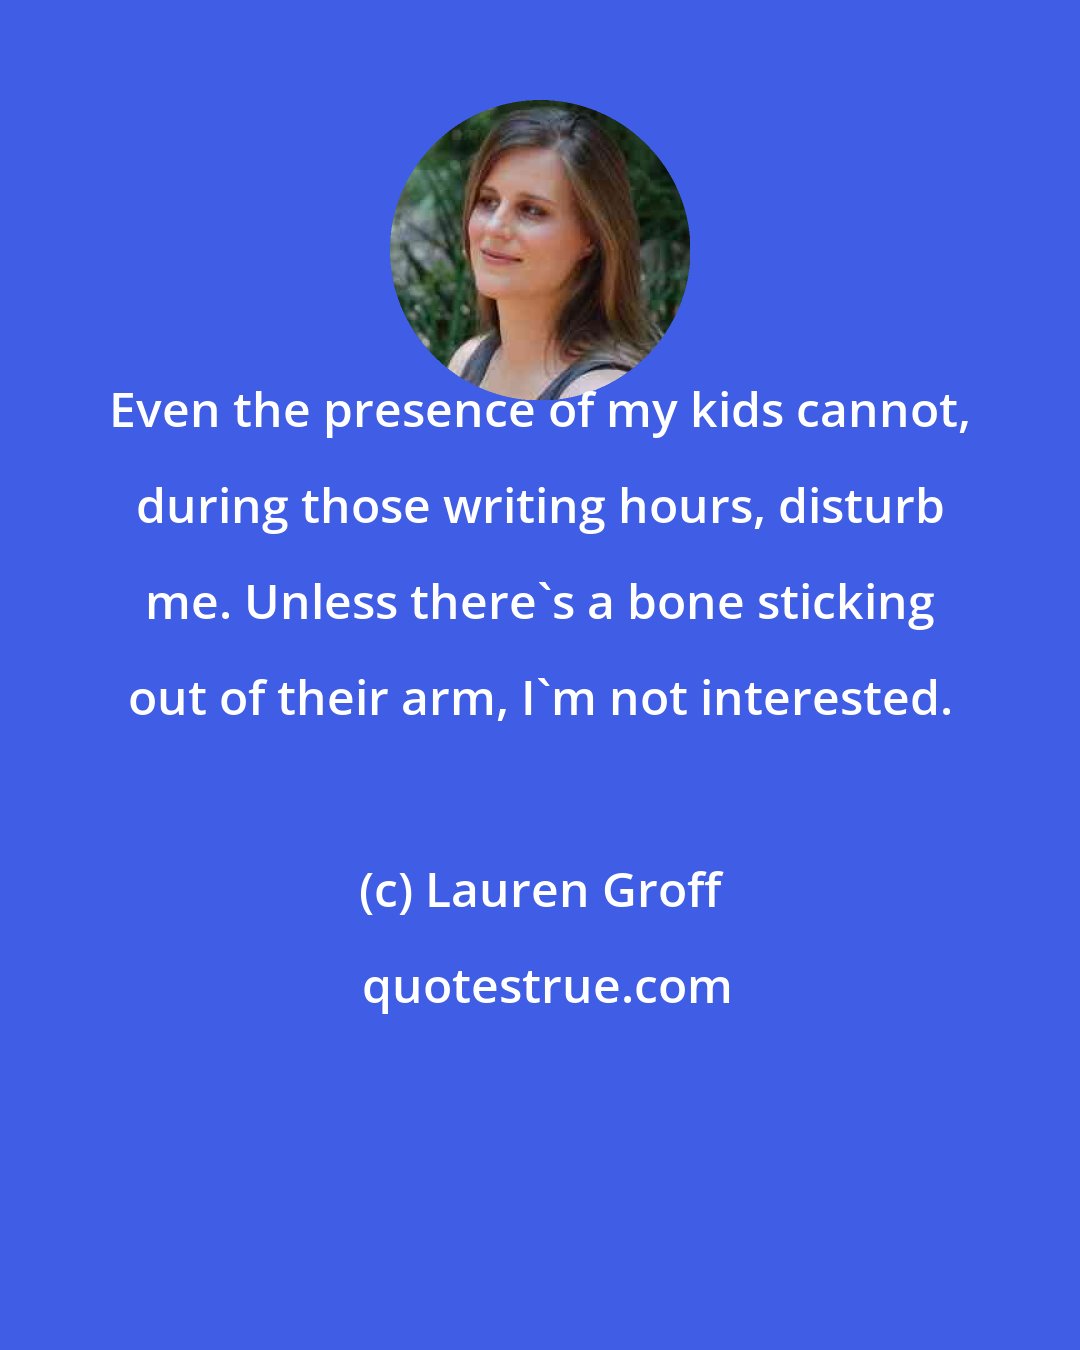 Lauren Groff: Even the presence of my kids cannot, during those writing hours, disturb me. Unless there's a bone sticking out of their arm, I'm not interested.